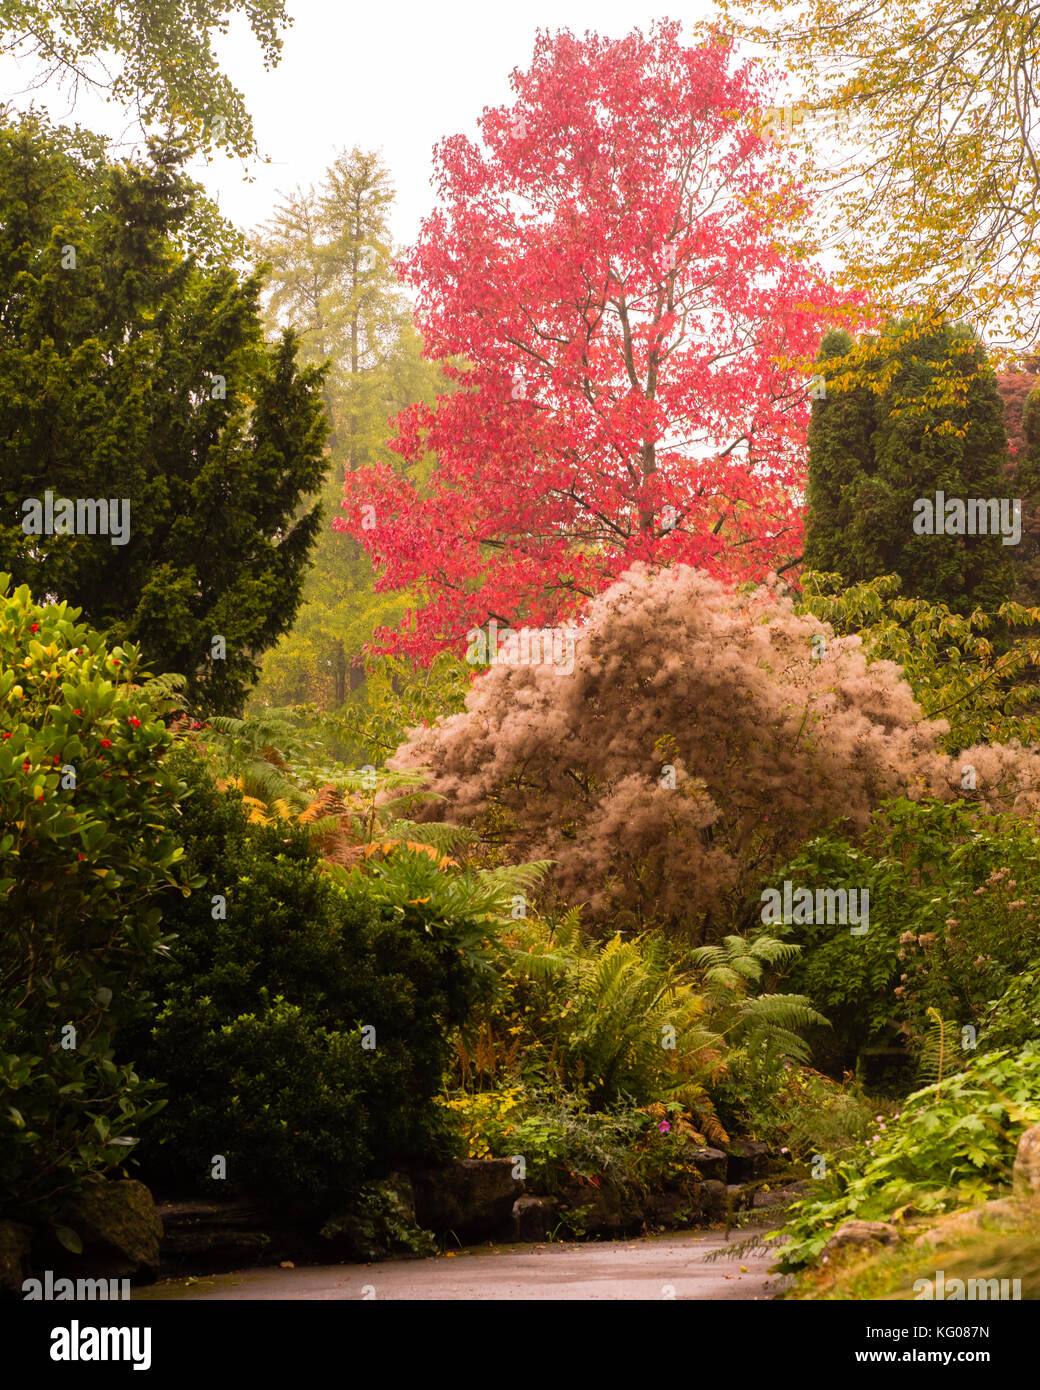 Autumn colours in Bath Botanic Gardens portrait. Trees and bushes showing autumnal reds, yellows and greens as October advances in England Stock Photo